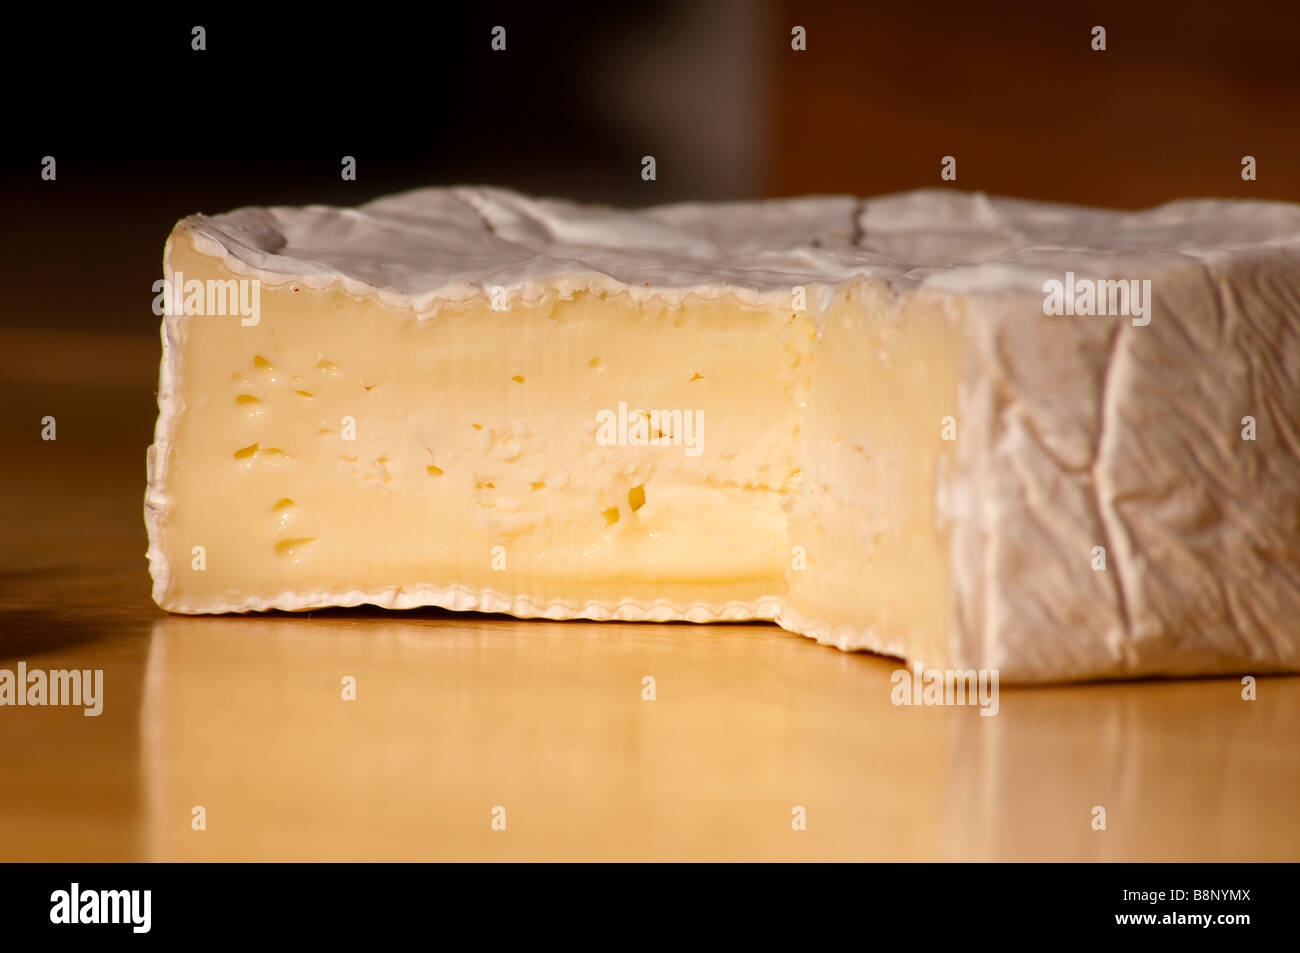 Fromage brie close up Banque D'Images